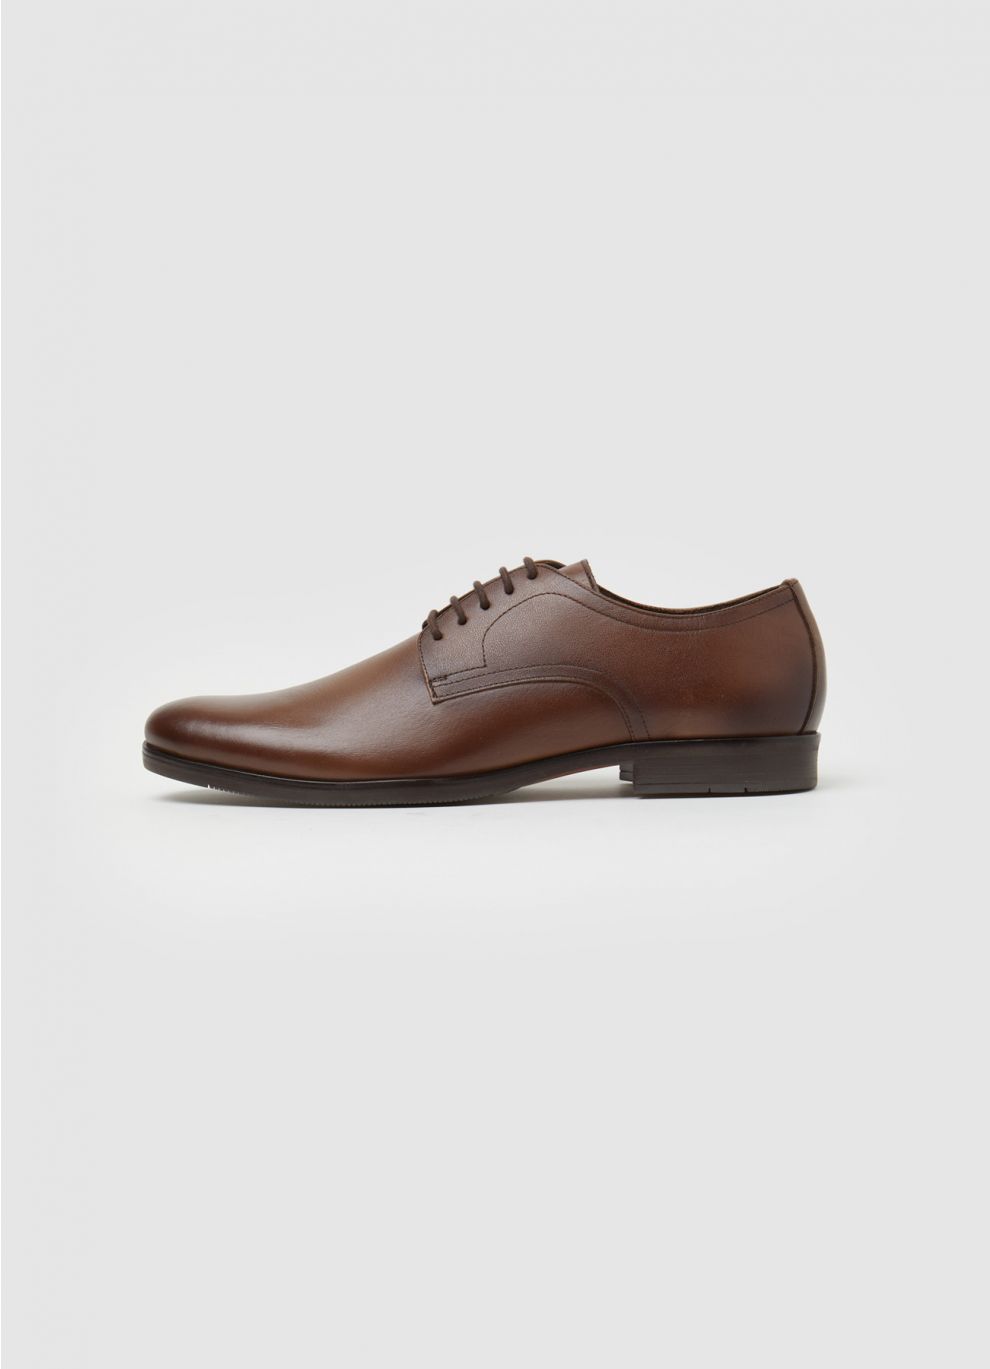 Buy Tan Formal Shoes for Men by Hats Off Accessories Online | Ajio.com